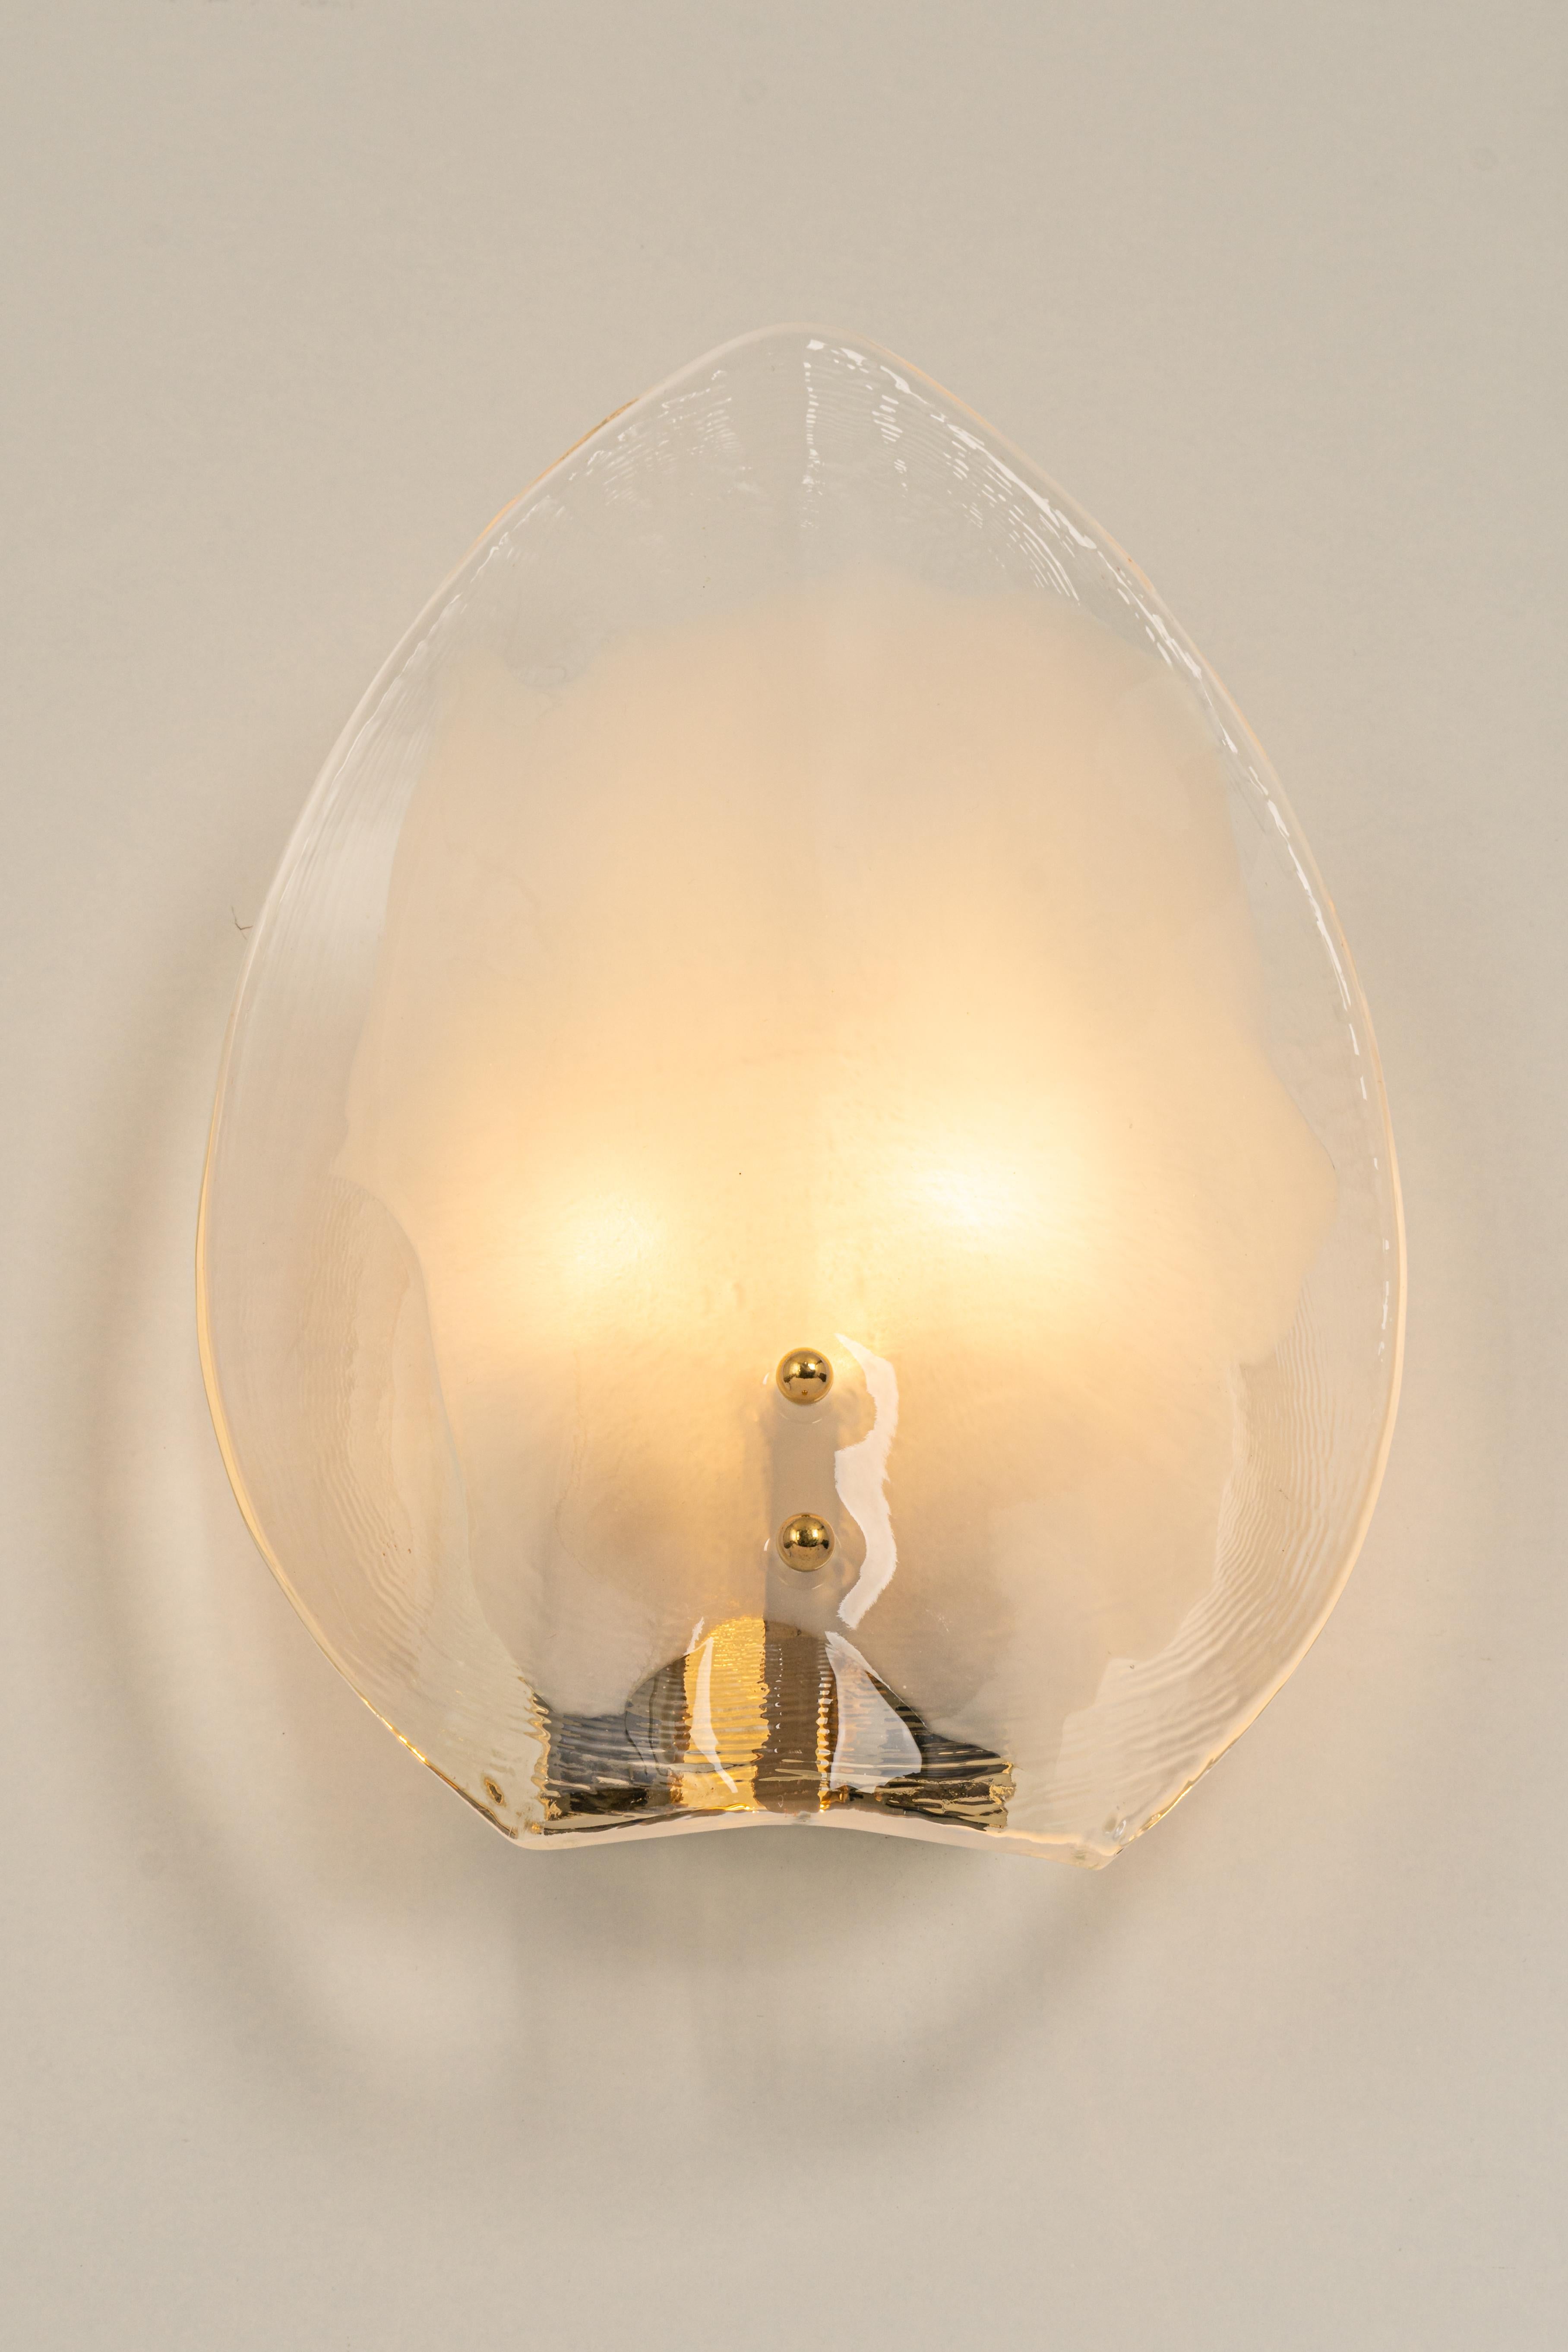 Wonderful mid-century wall sconce with Murano glass, made by Kalmar, Austria, manufactured, circa 1960-1969.
The frame is gilt brass.
High quality and in very good condition. Cleaned, well-wired, and ready to use.  

Each sconce requires 2 x E14